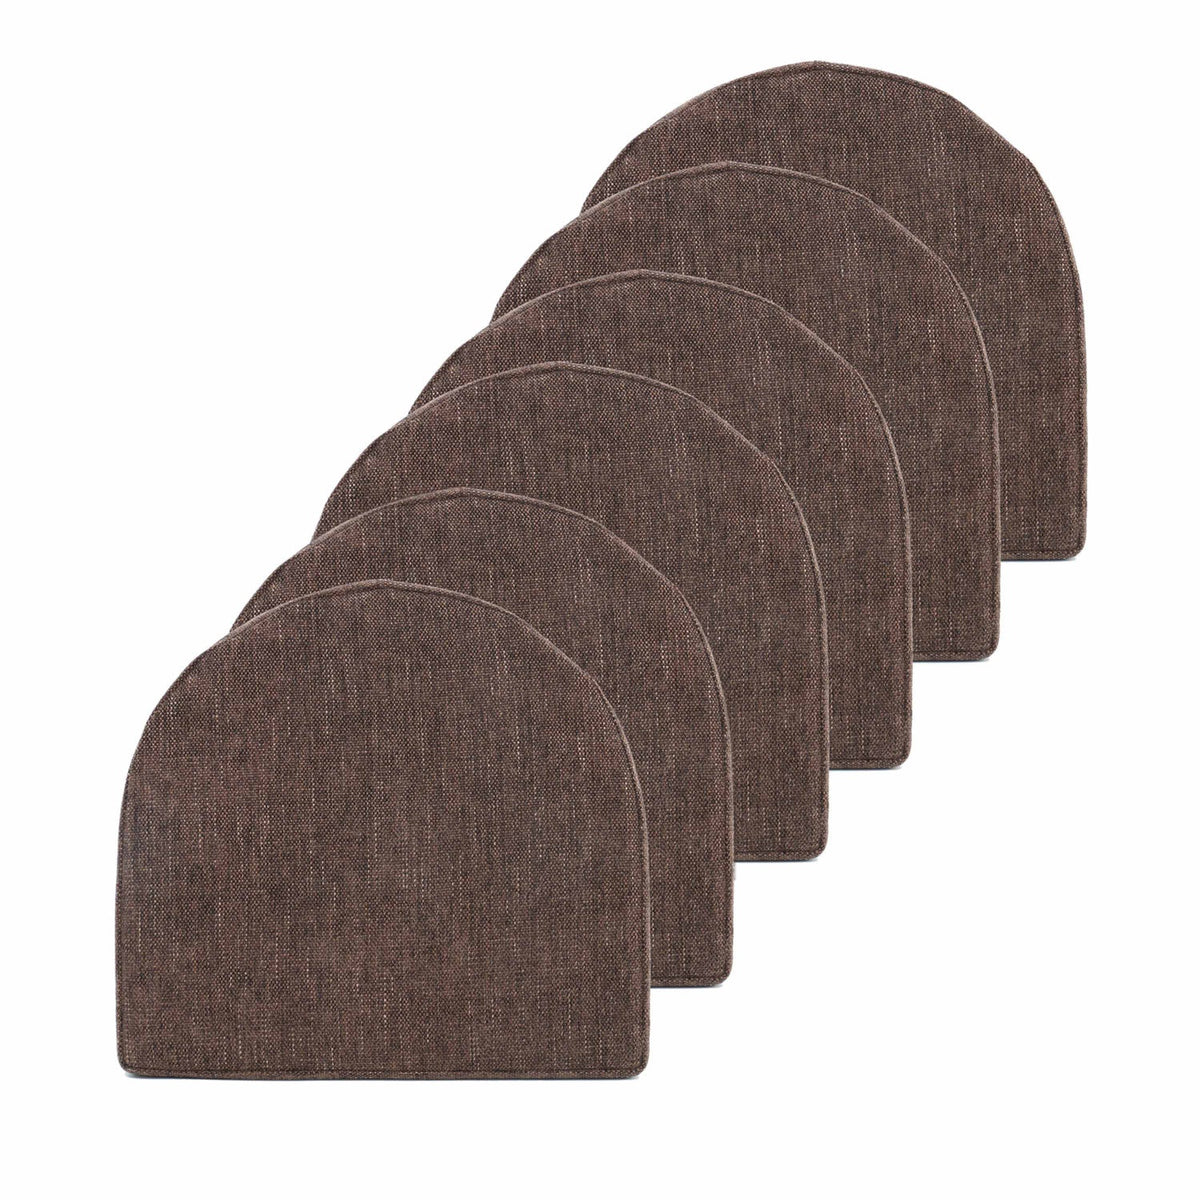 U Shape Molded Chair Cushions With Ties Chocolate 6-Pack - Top